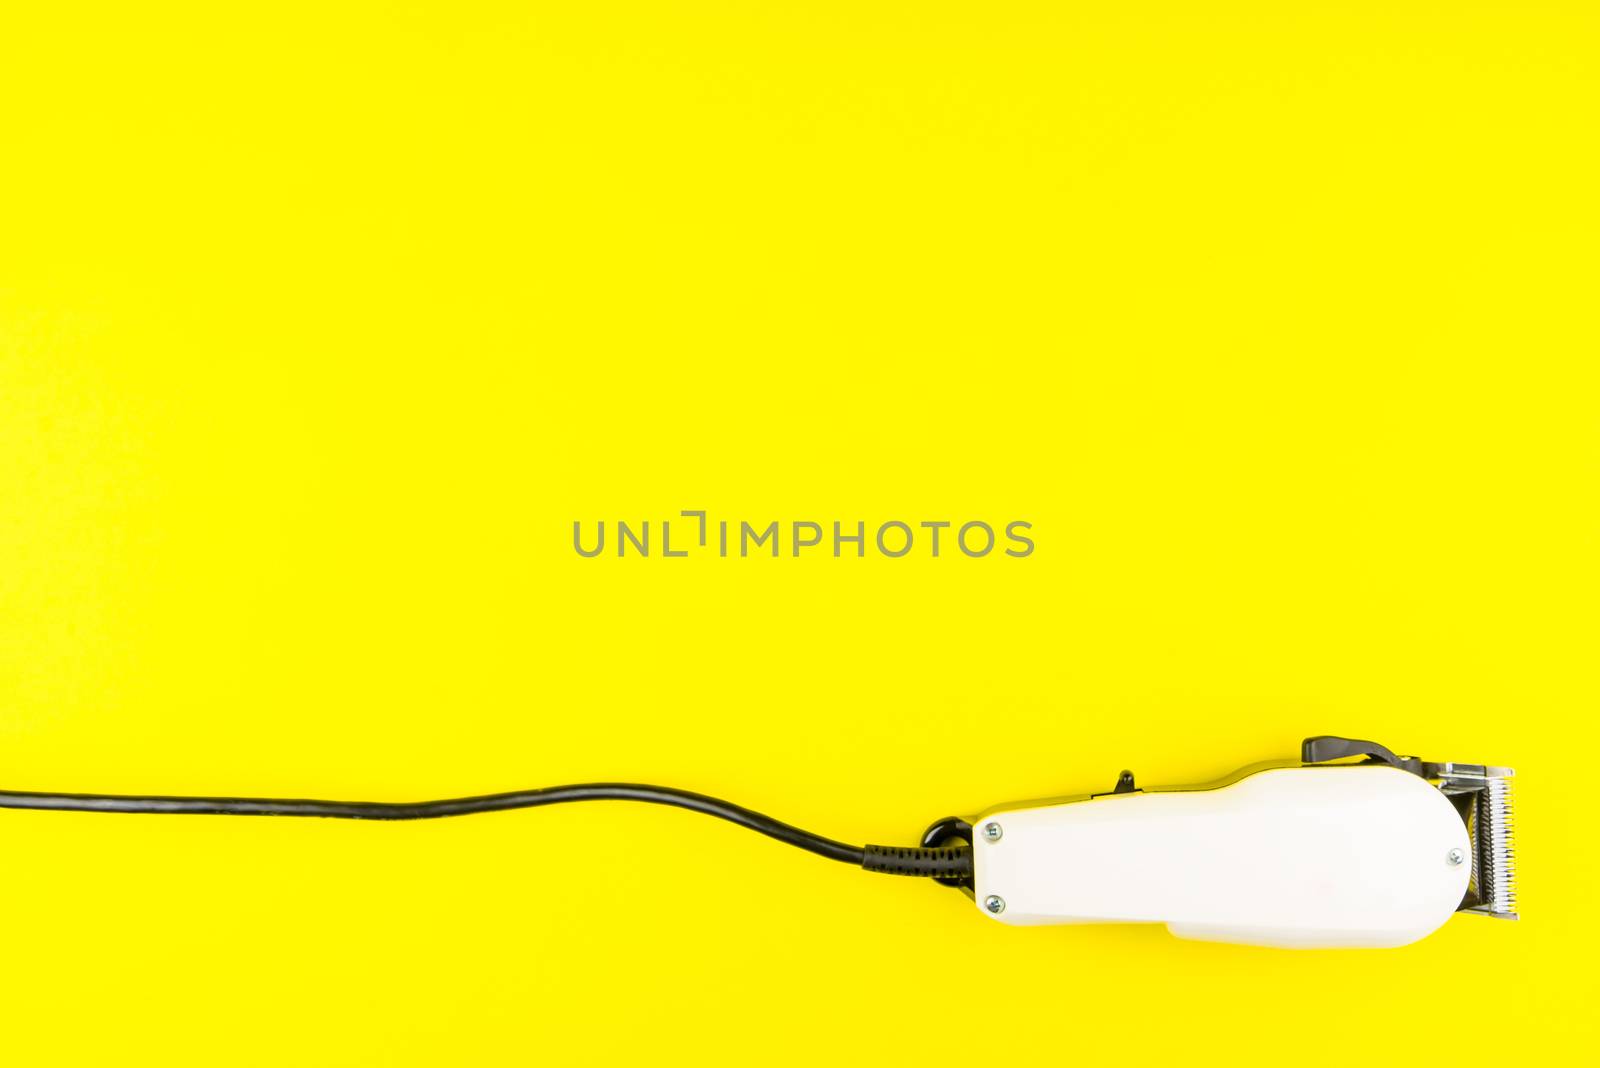 White electric clippers barber on yellow background. Hairdresser salon concept, Hairdressing Set. Haircut accessories. Copy space image, flat lay